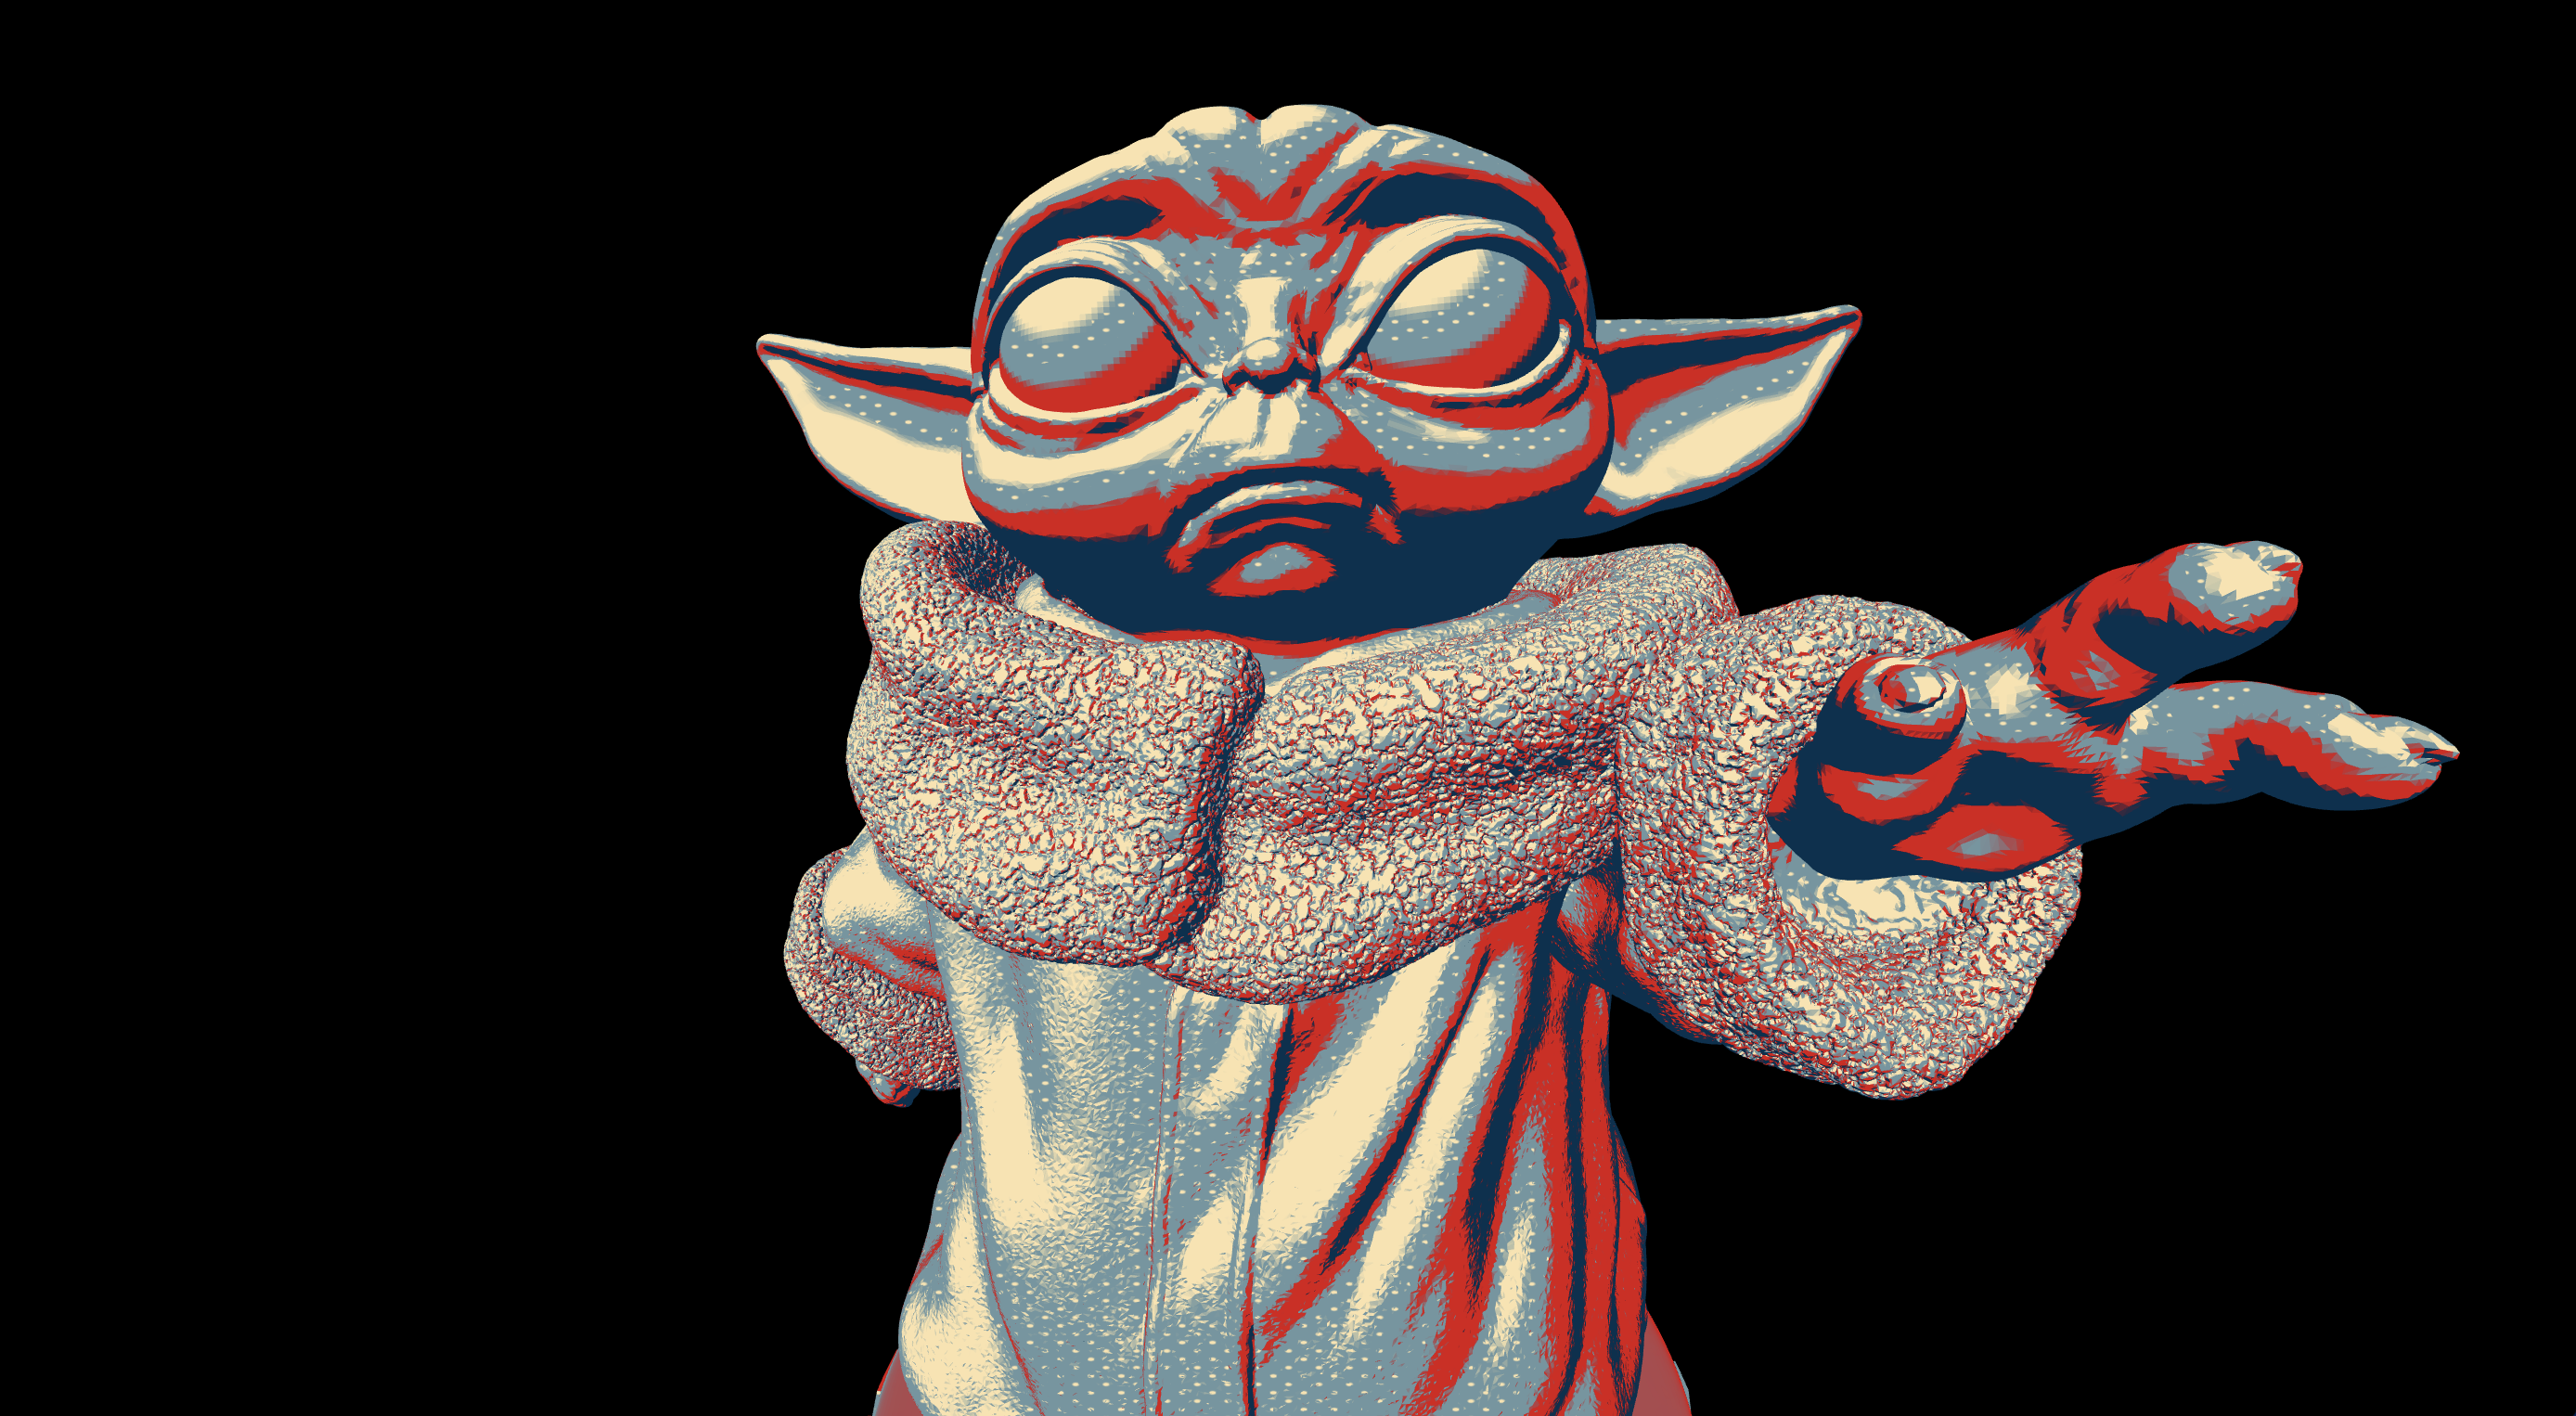 Baby Yoda colored like the Obama Hope Poster